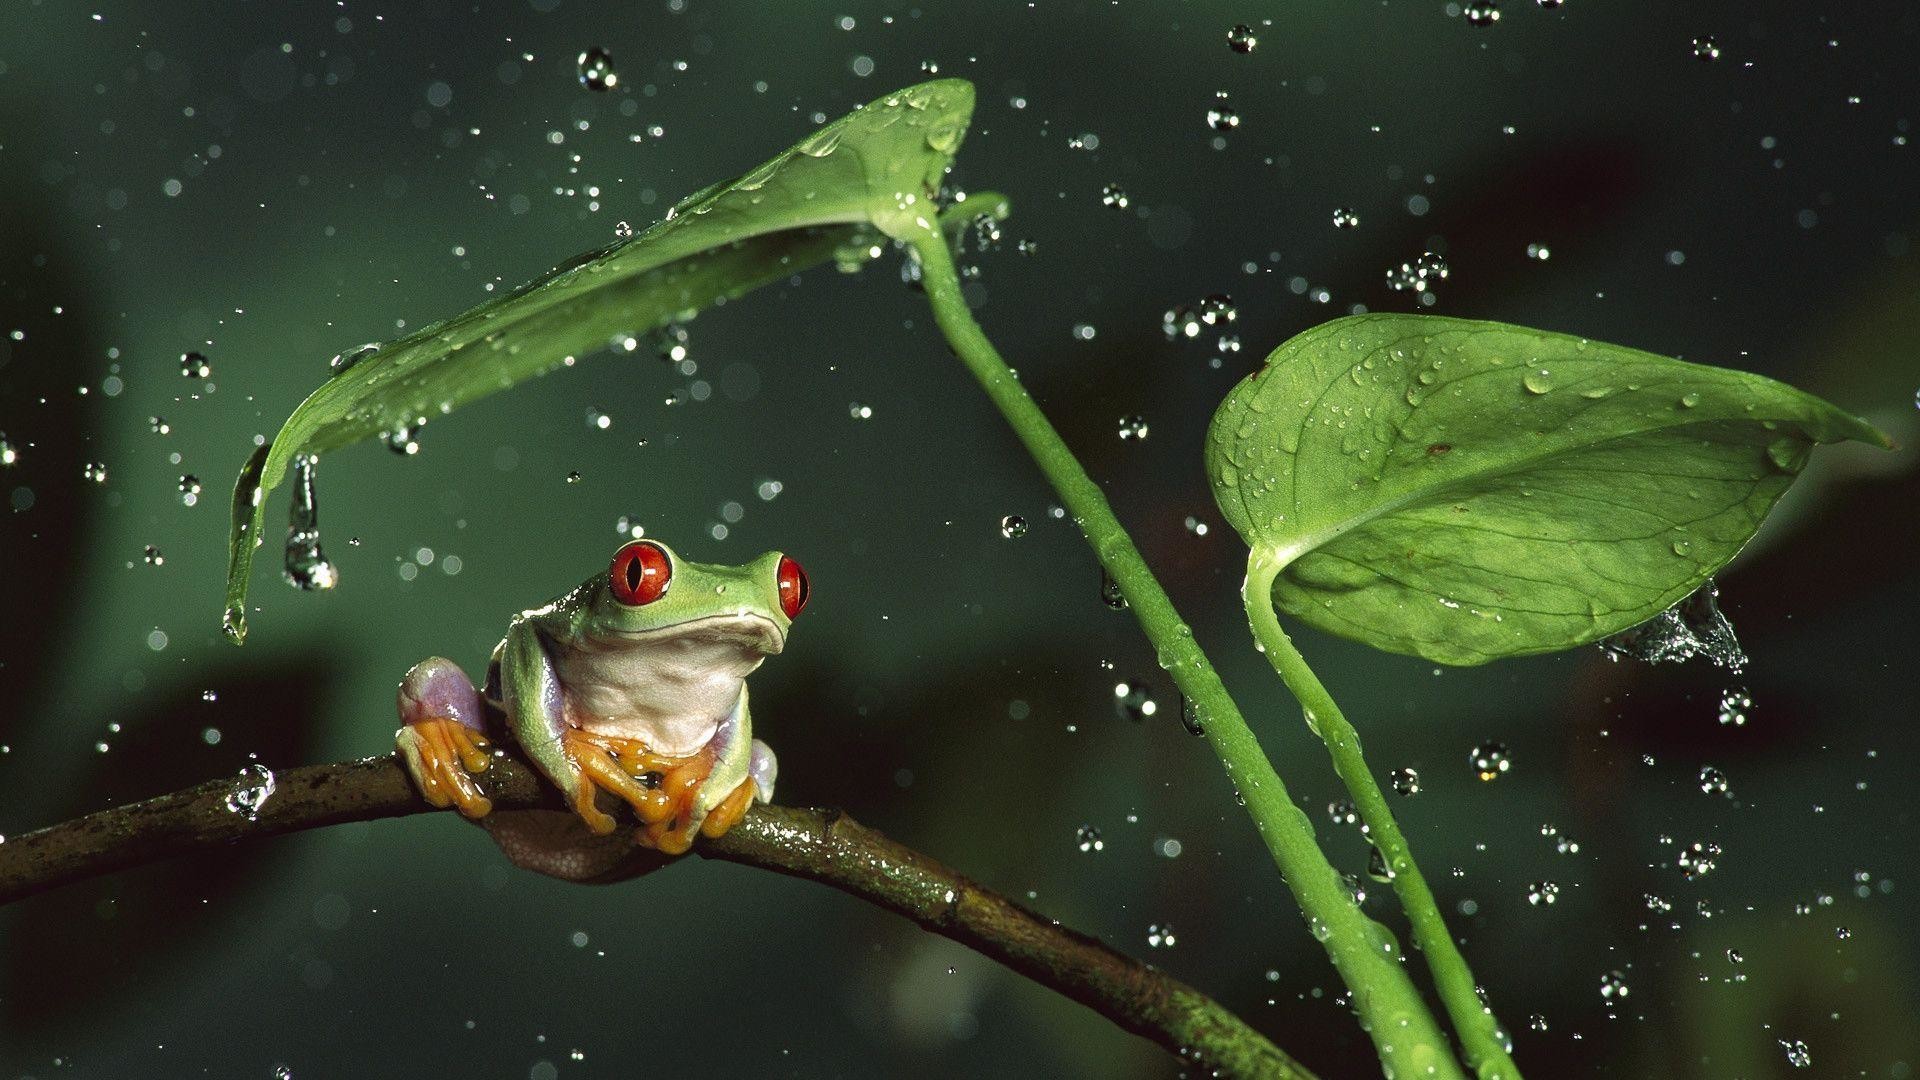 1920x1080 Frog and leaves desktop wallpapers 800x600, Frog and leaves .